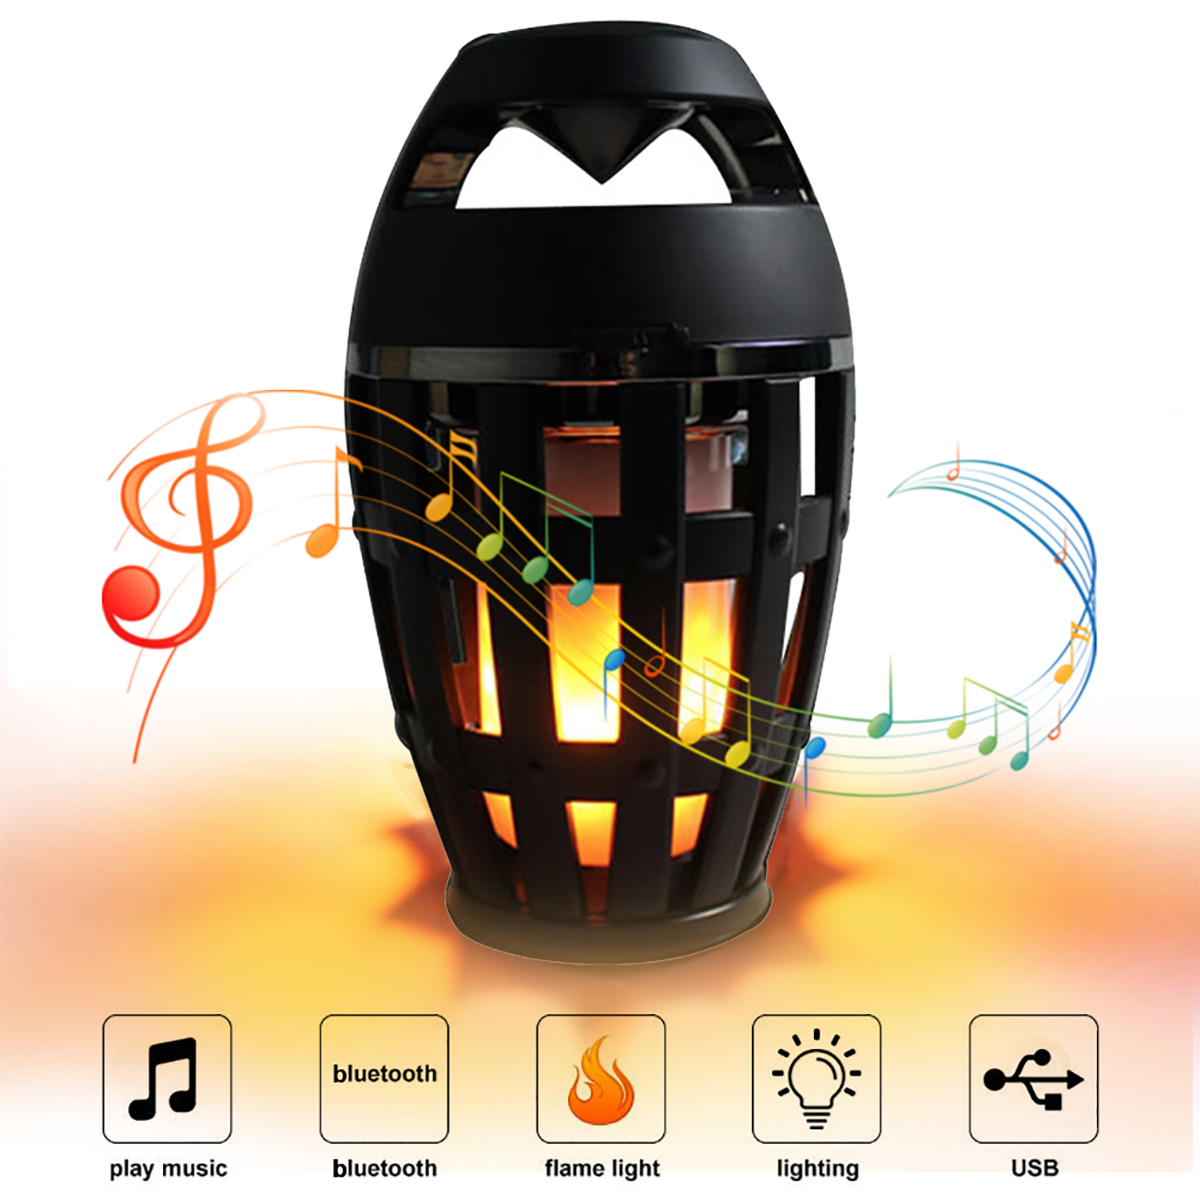 Wireless-bluetooth-Speaker-LED-Flame-Light-Night-Lamp-Portable-Stereo-Speaker-with-Flickers-Warm-Whi-1619613-2